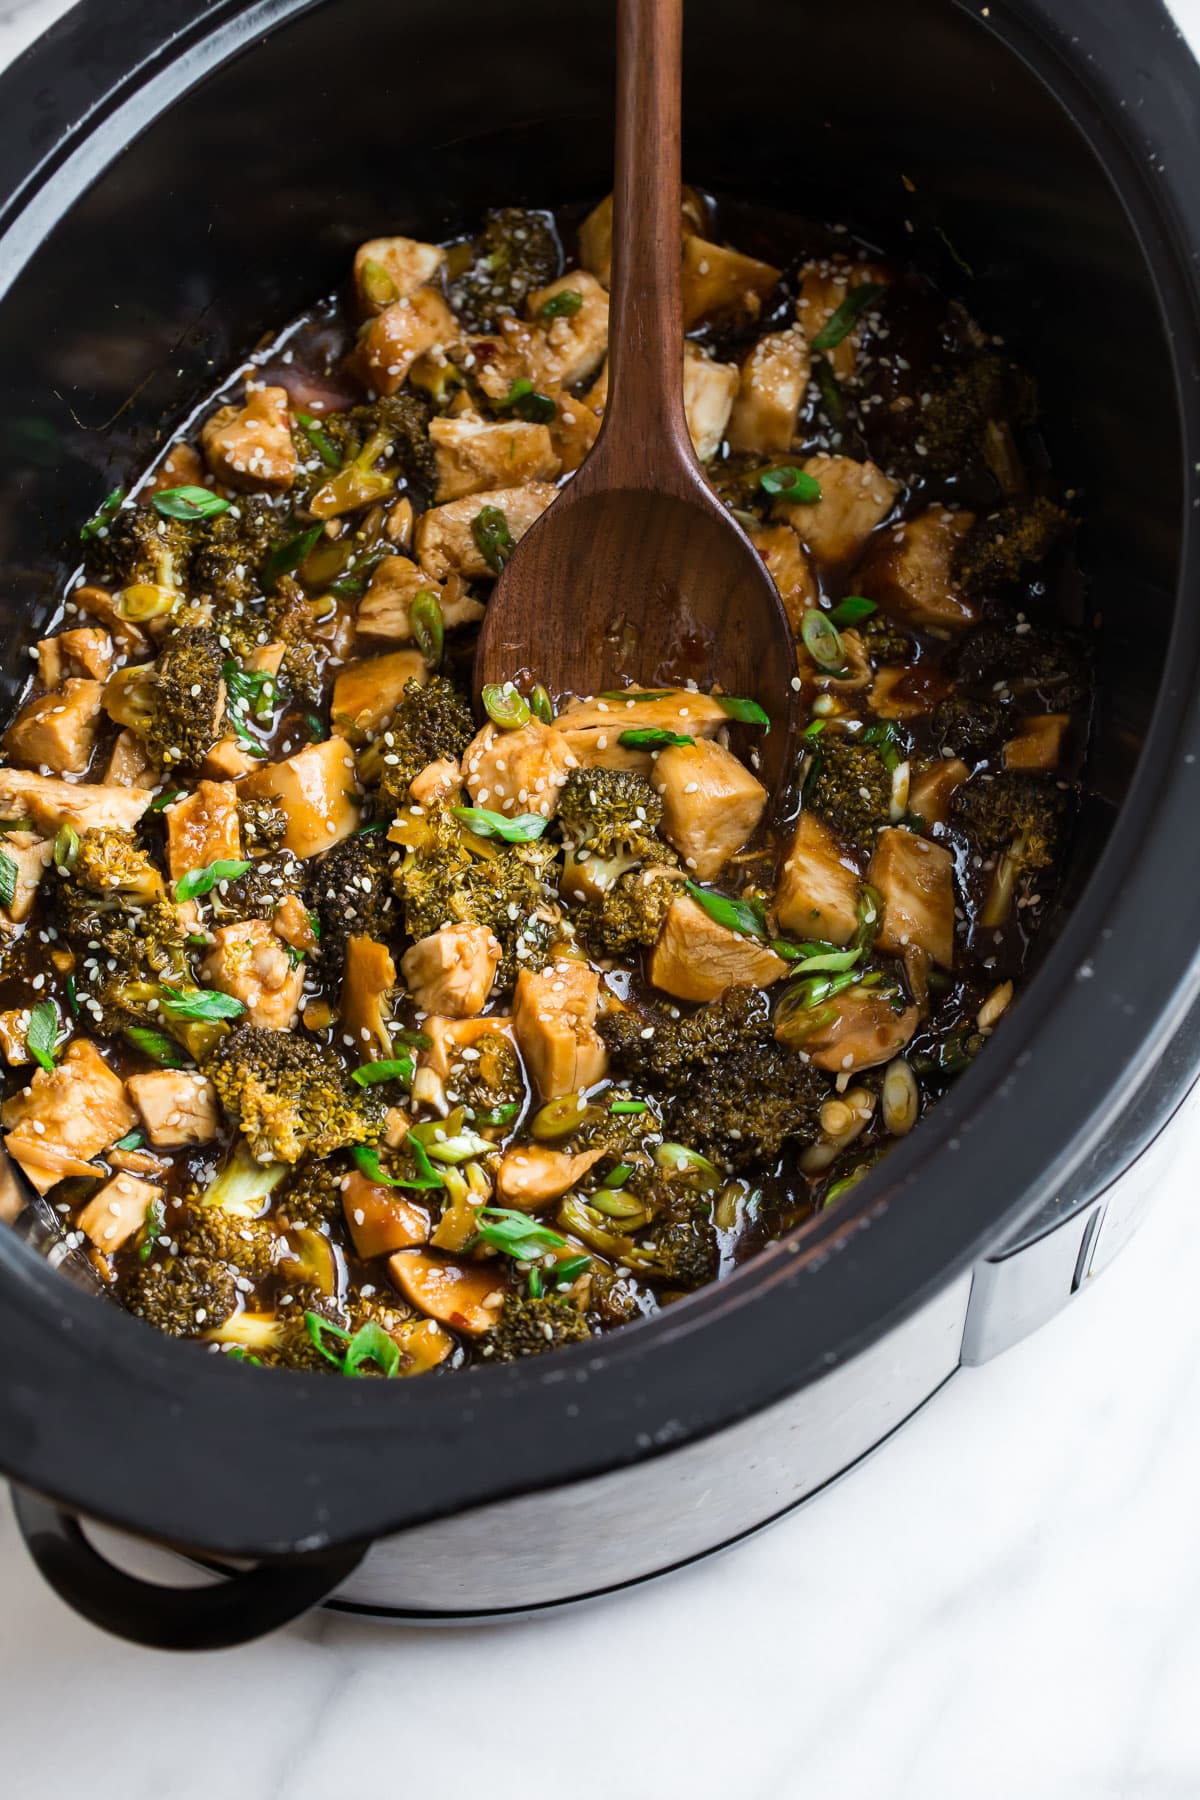 A crockpot filled with chicken and broccoli with a soy ginger sauce